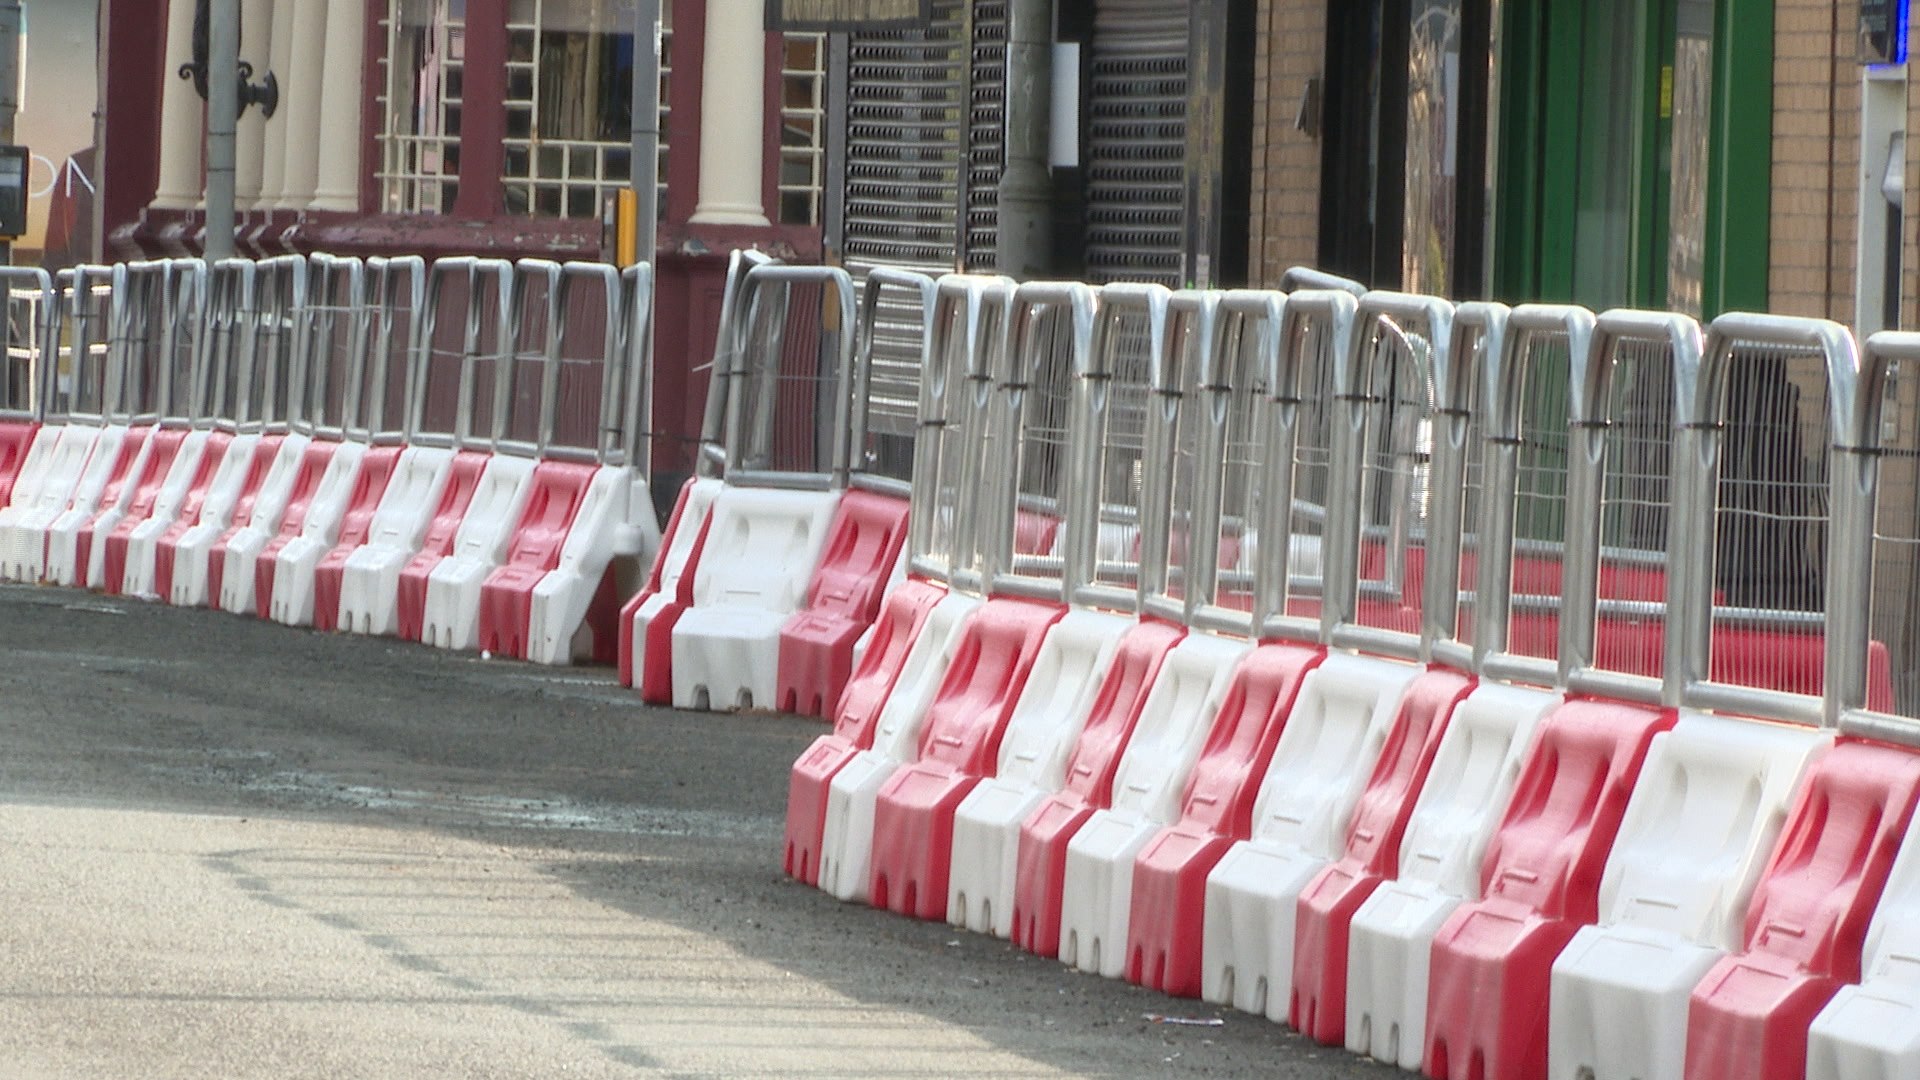 The barriers were put in place to widen pavements for social distancing.